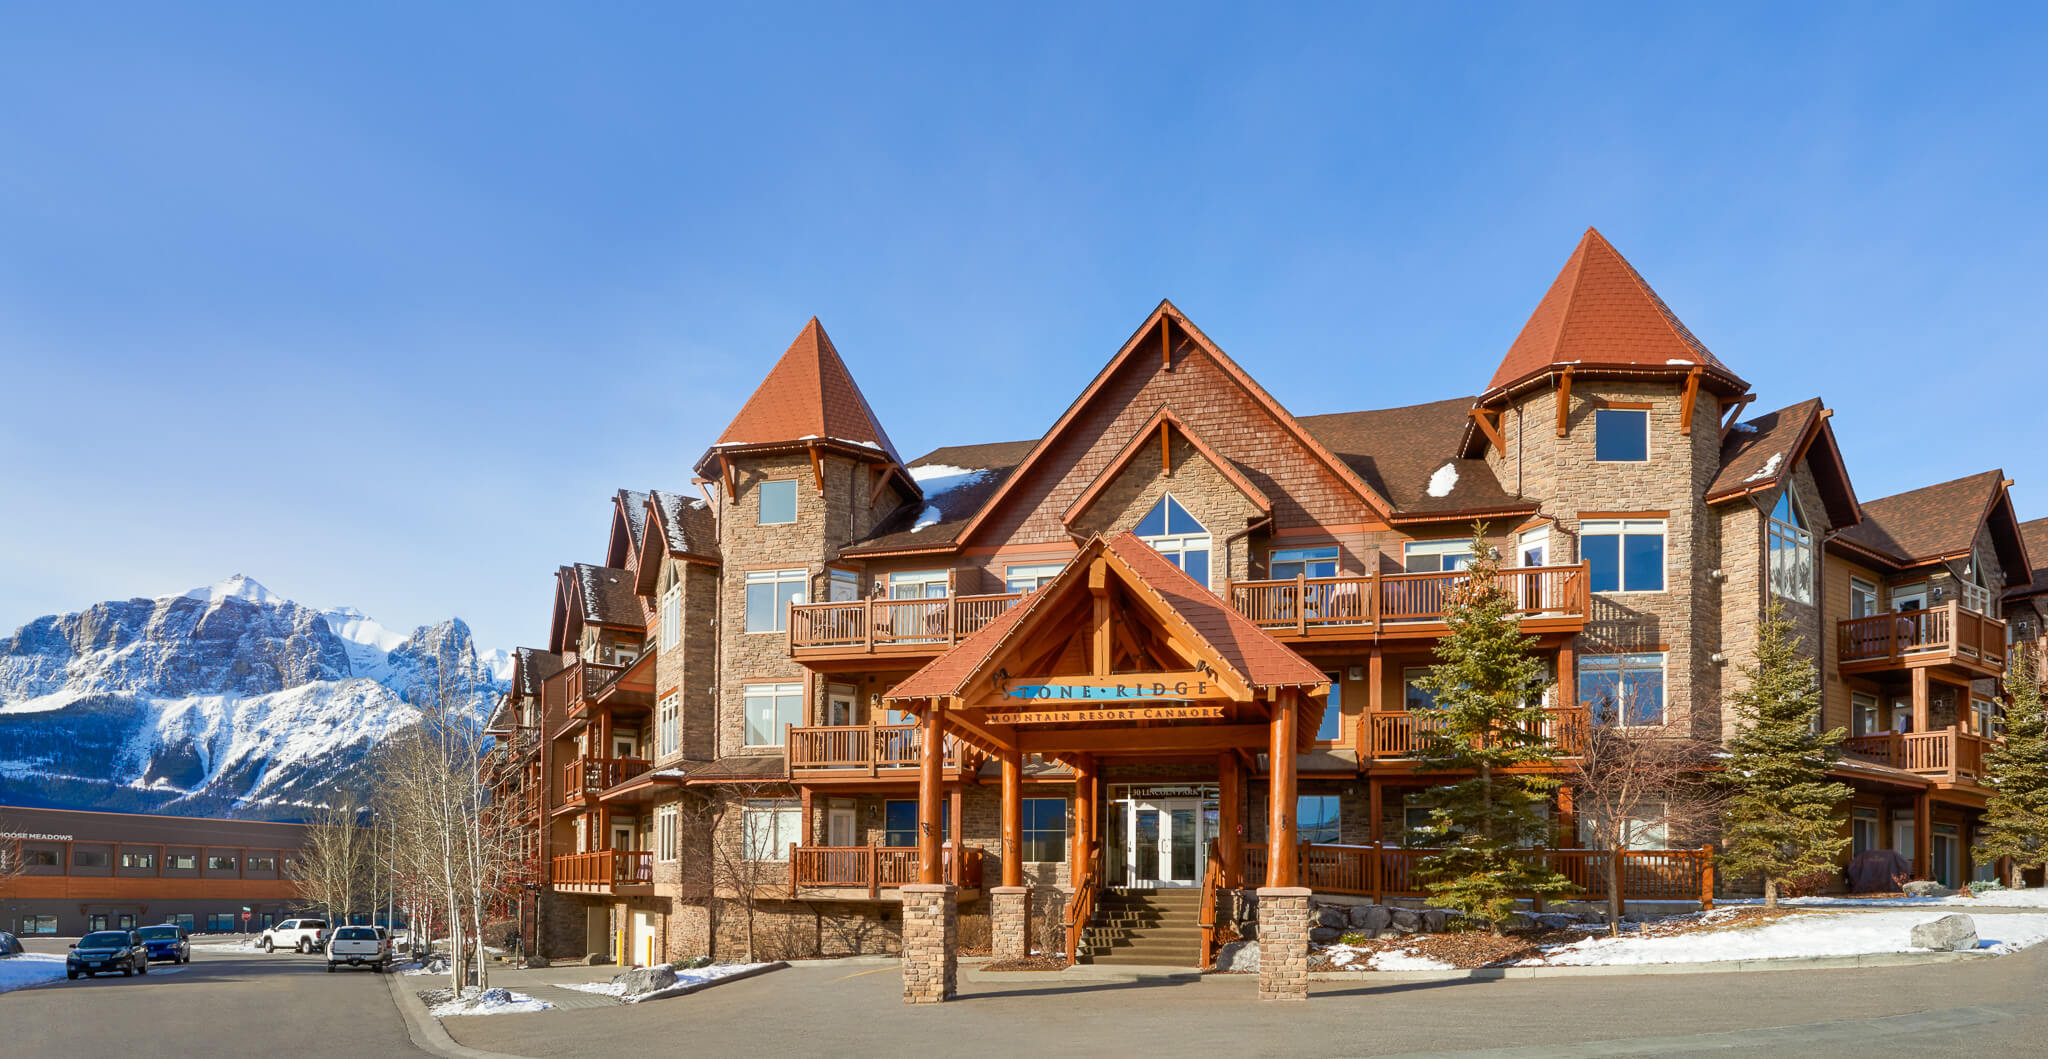 5 star hotels in canmore alberta